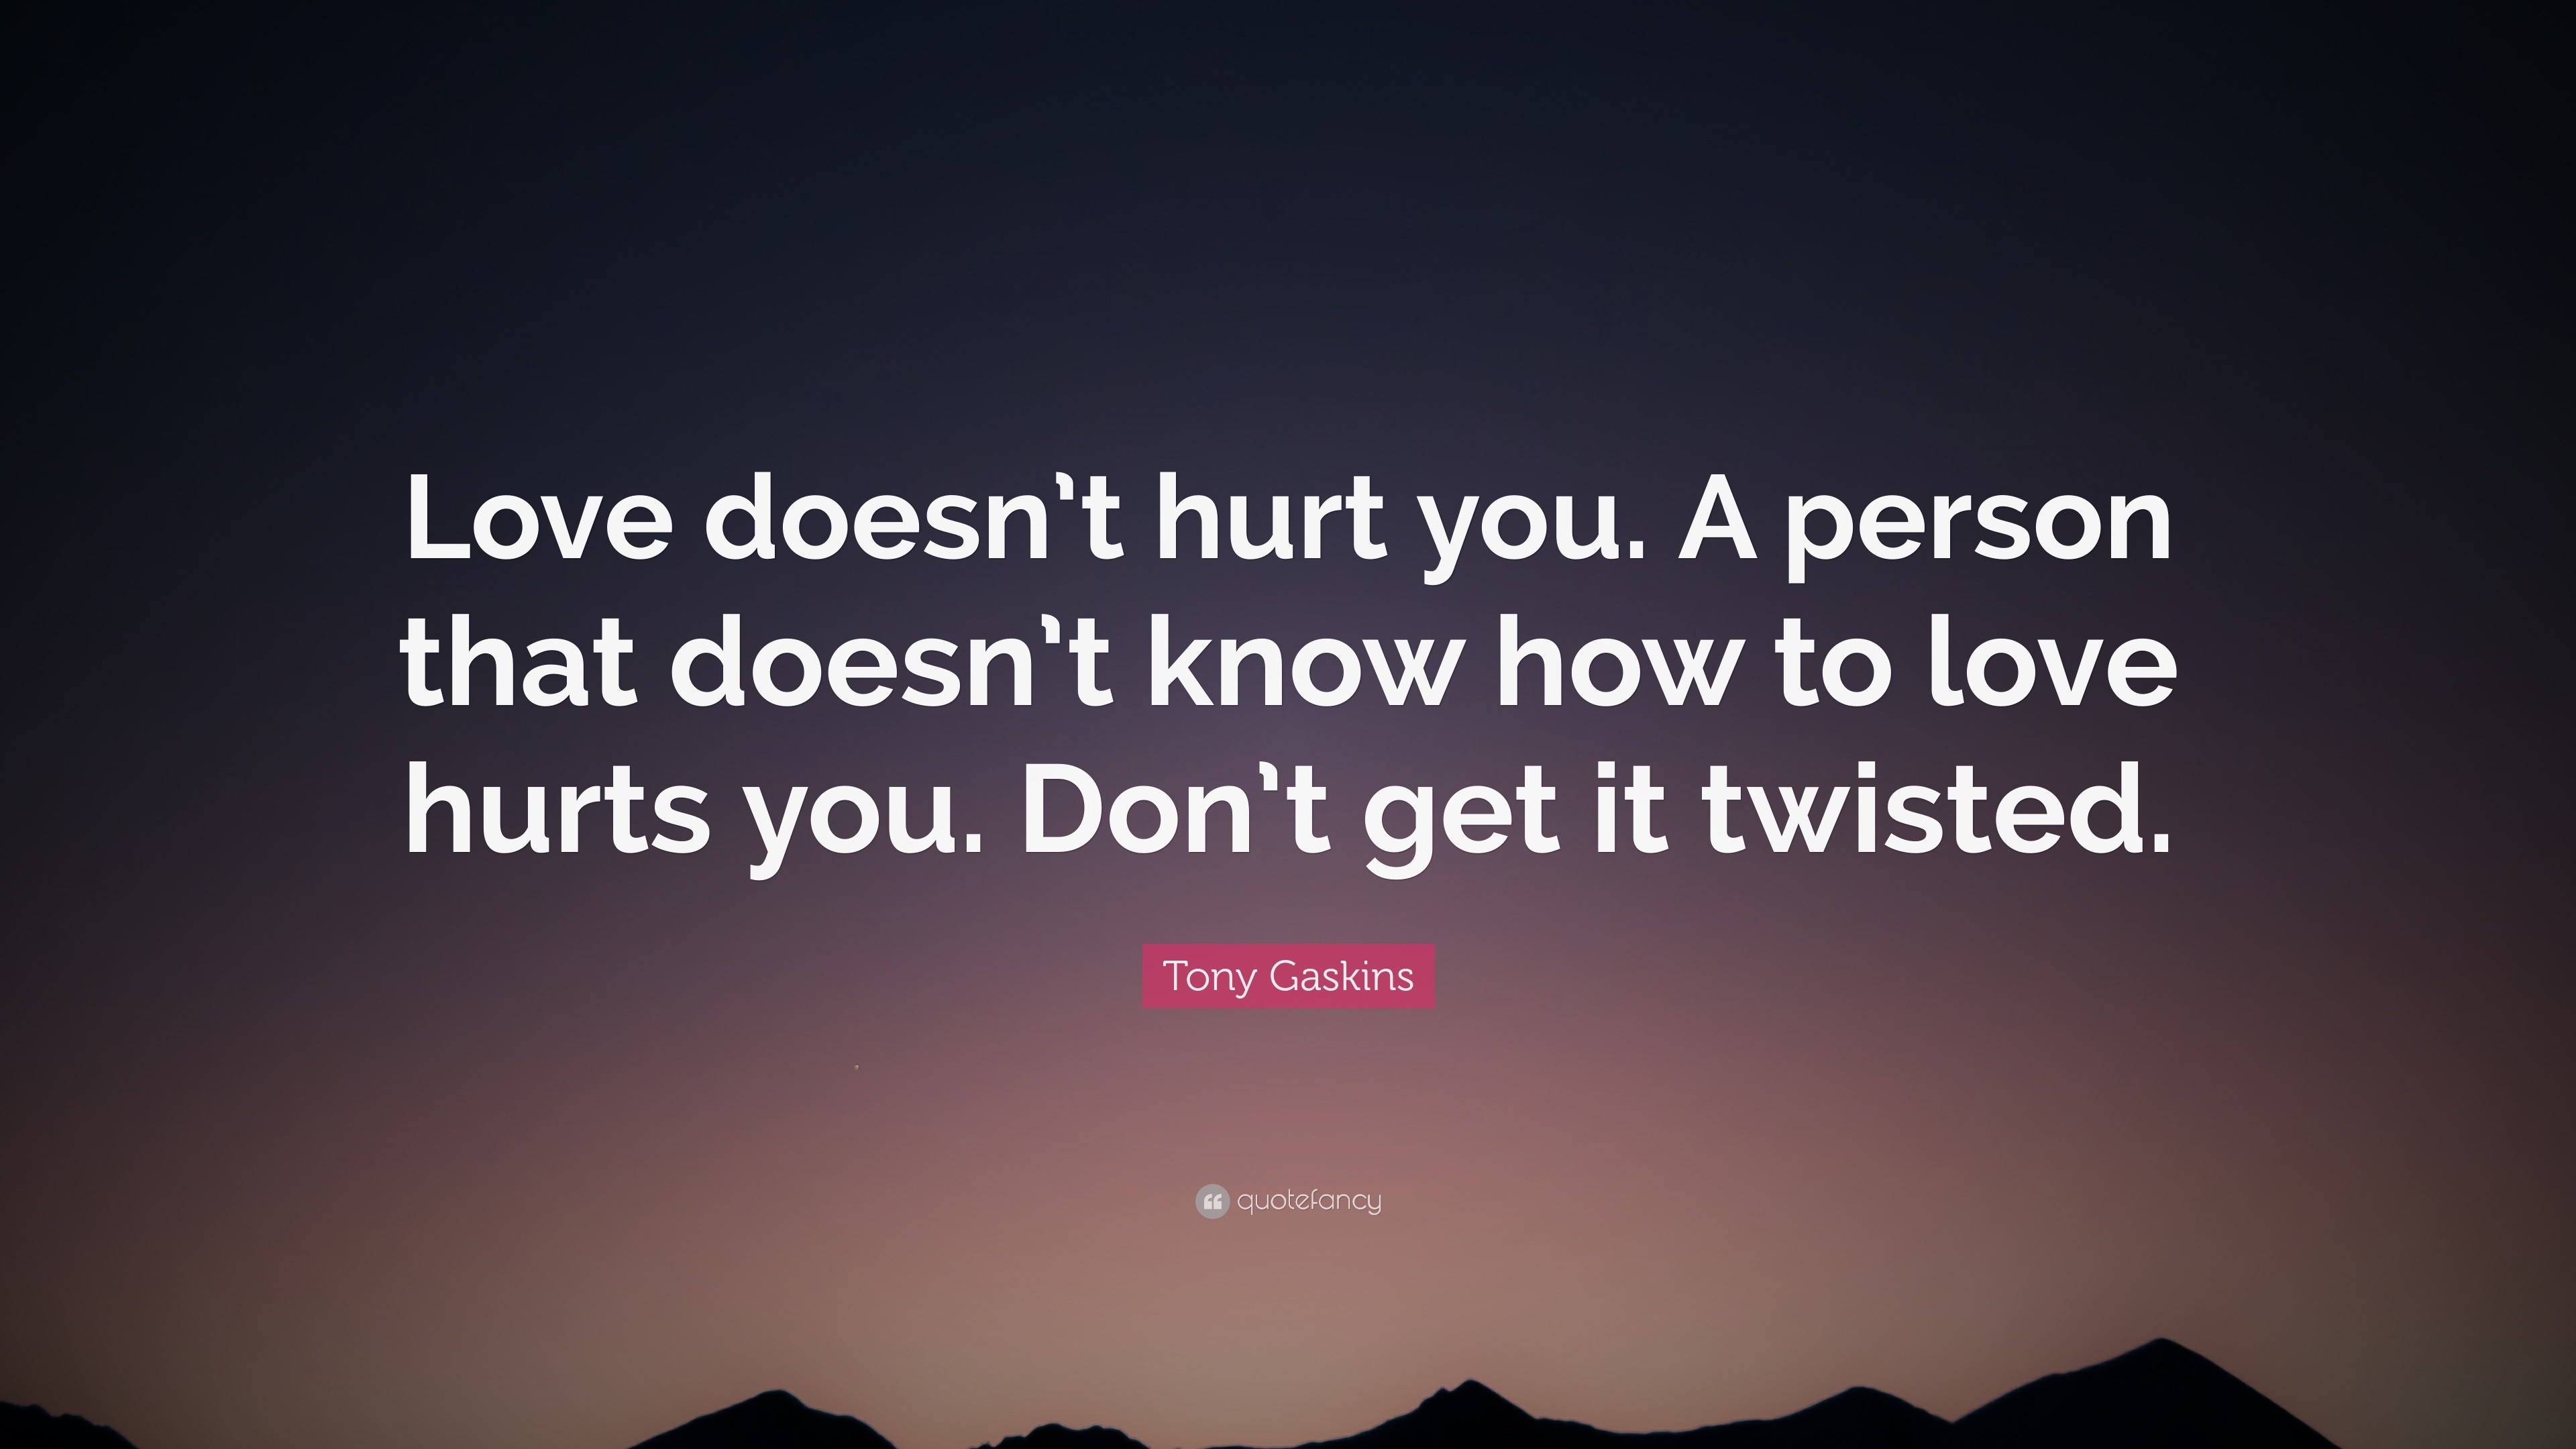 3840x2160 Tony Gaskins Quote: “Love doesn't hurt you. A person that doesn